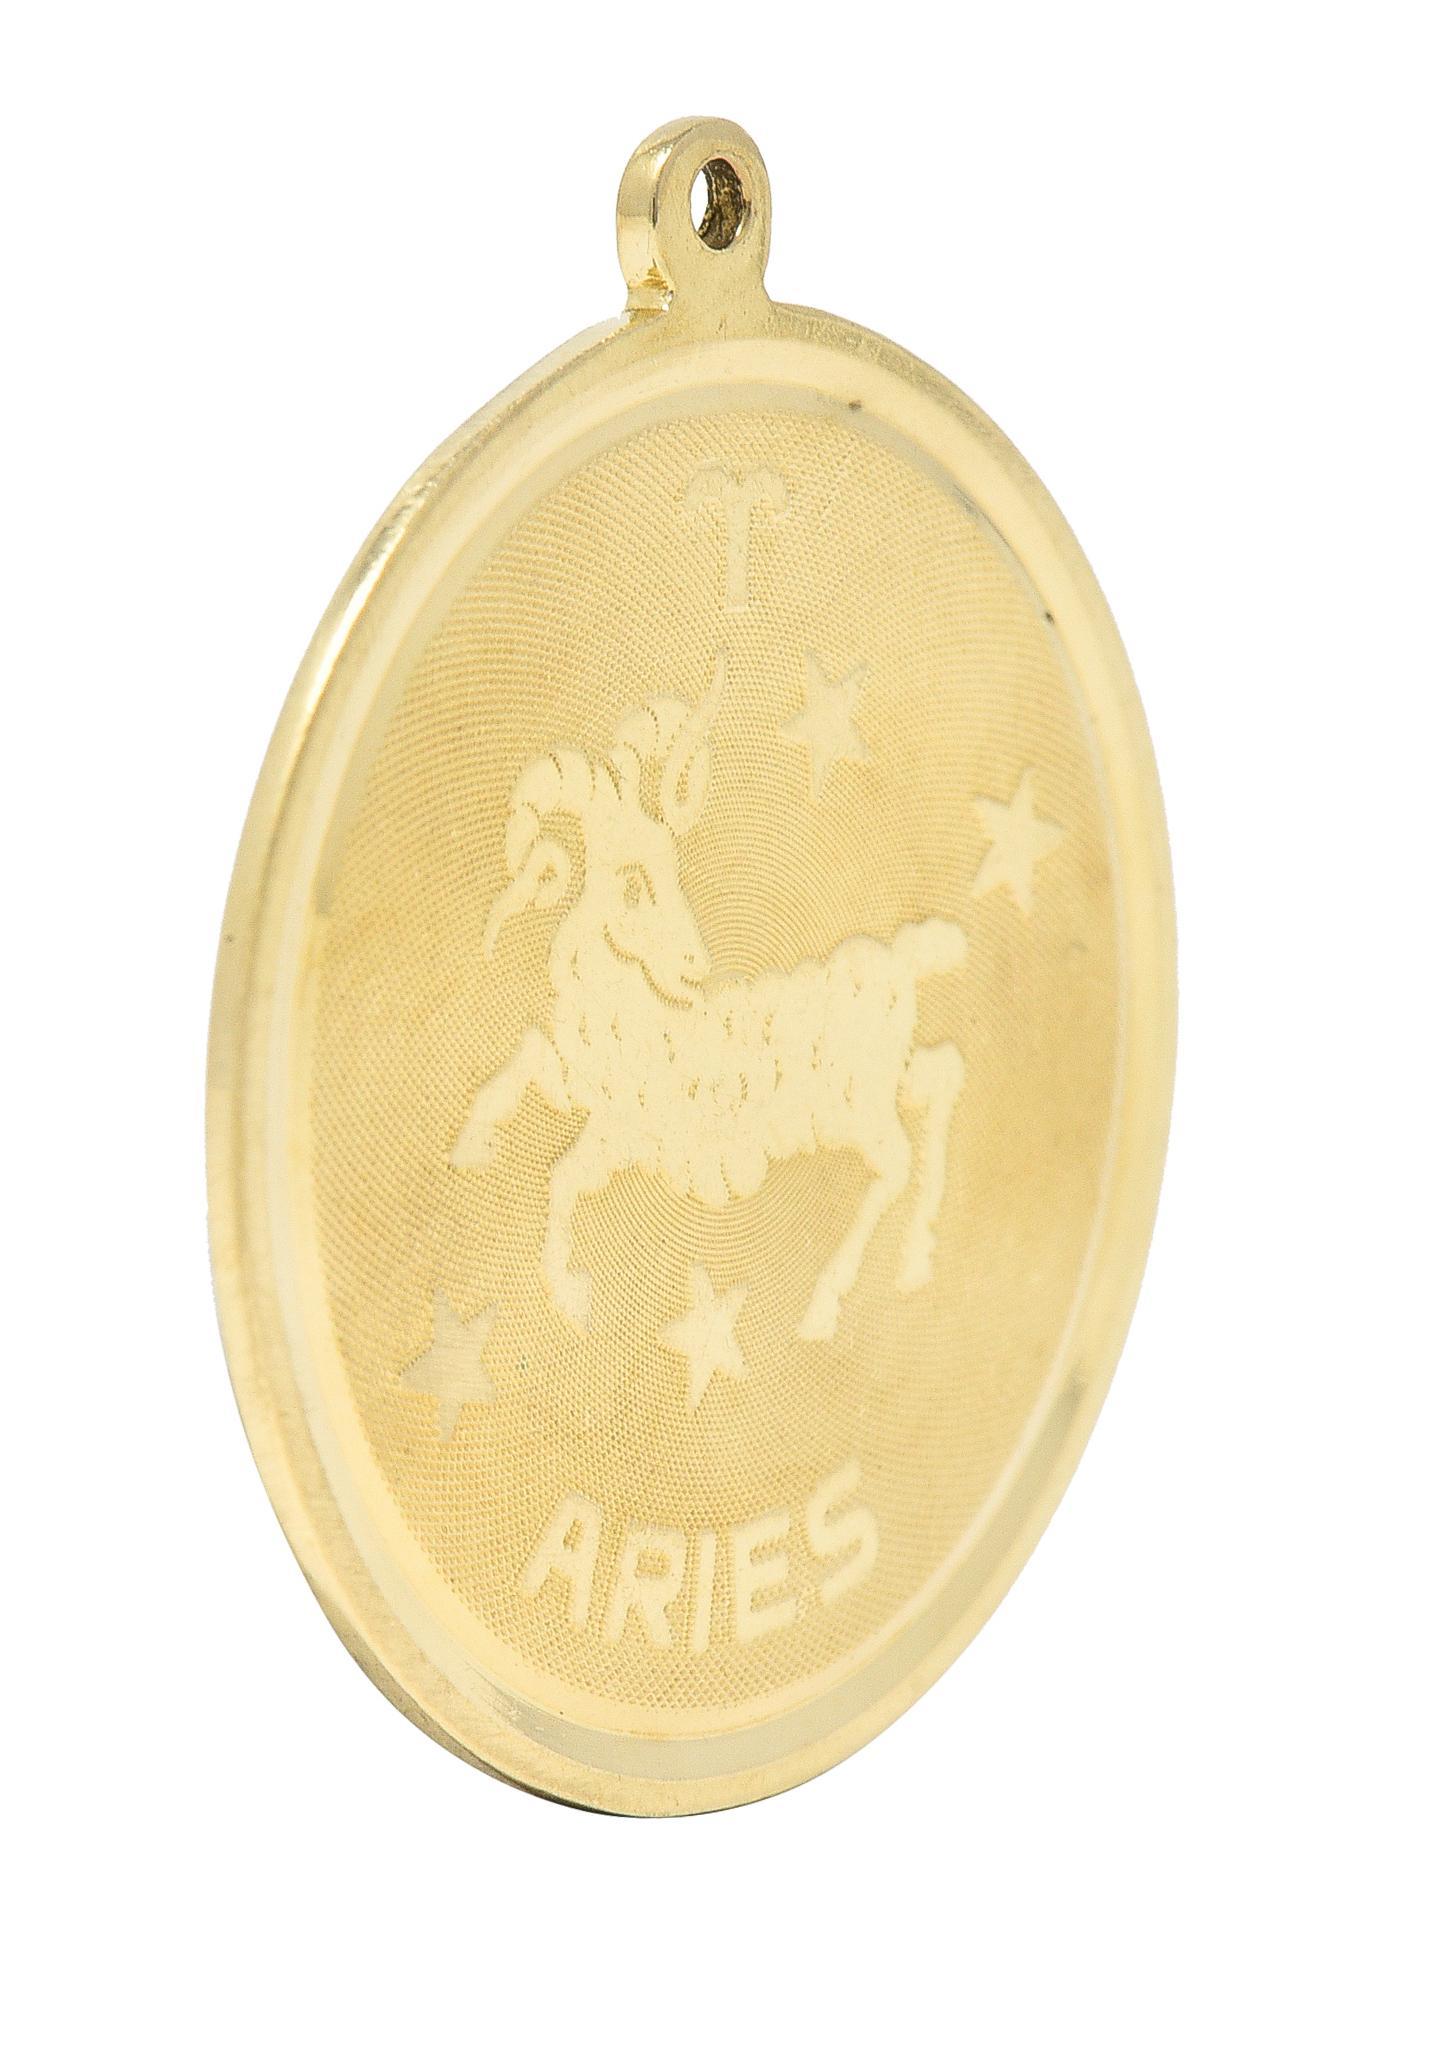 Designed as a round disk with high polished edges and a raised Aries zodiac motif
With the astrological Aries symbol, a ram, stars, and inscribed 'Aries'
With a finely cross-hatch textured recess
Completed by pierced bale
Tested as 14 karat